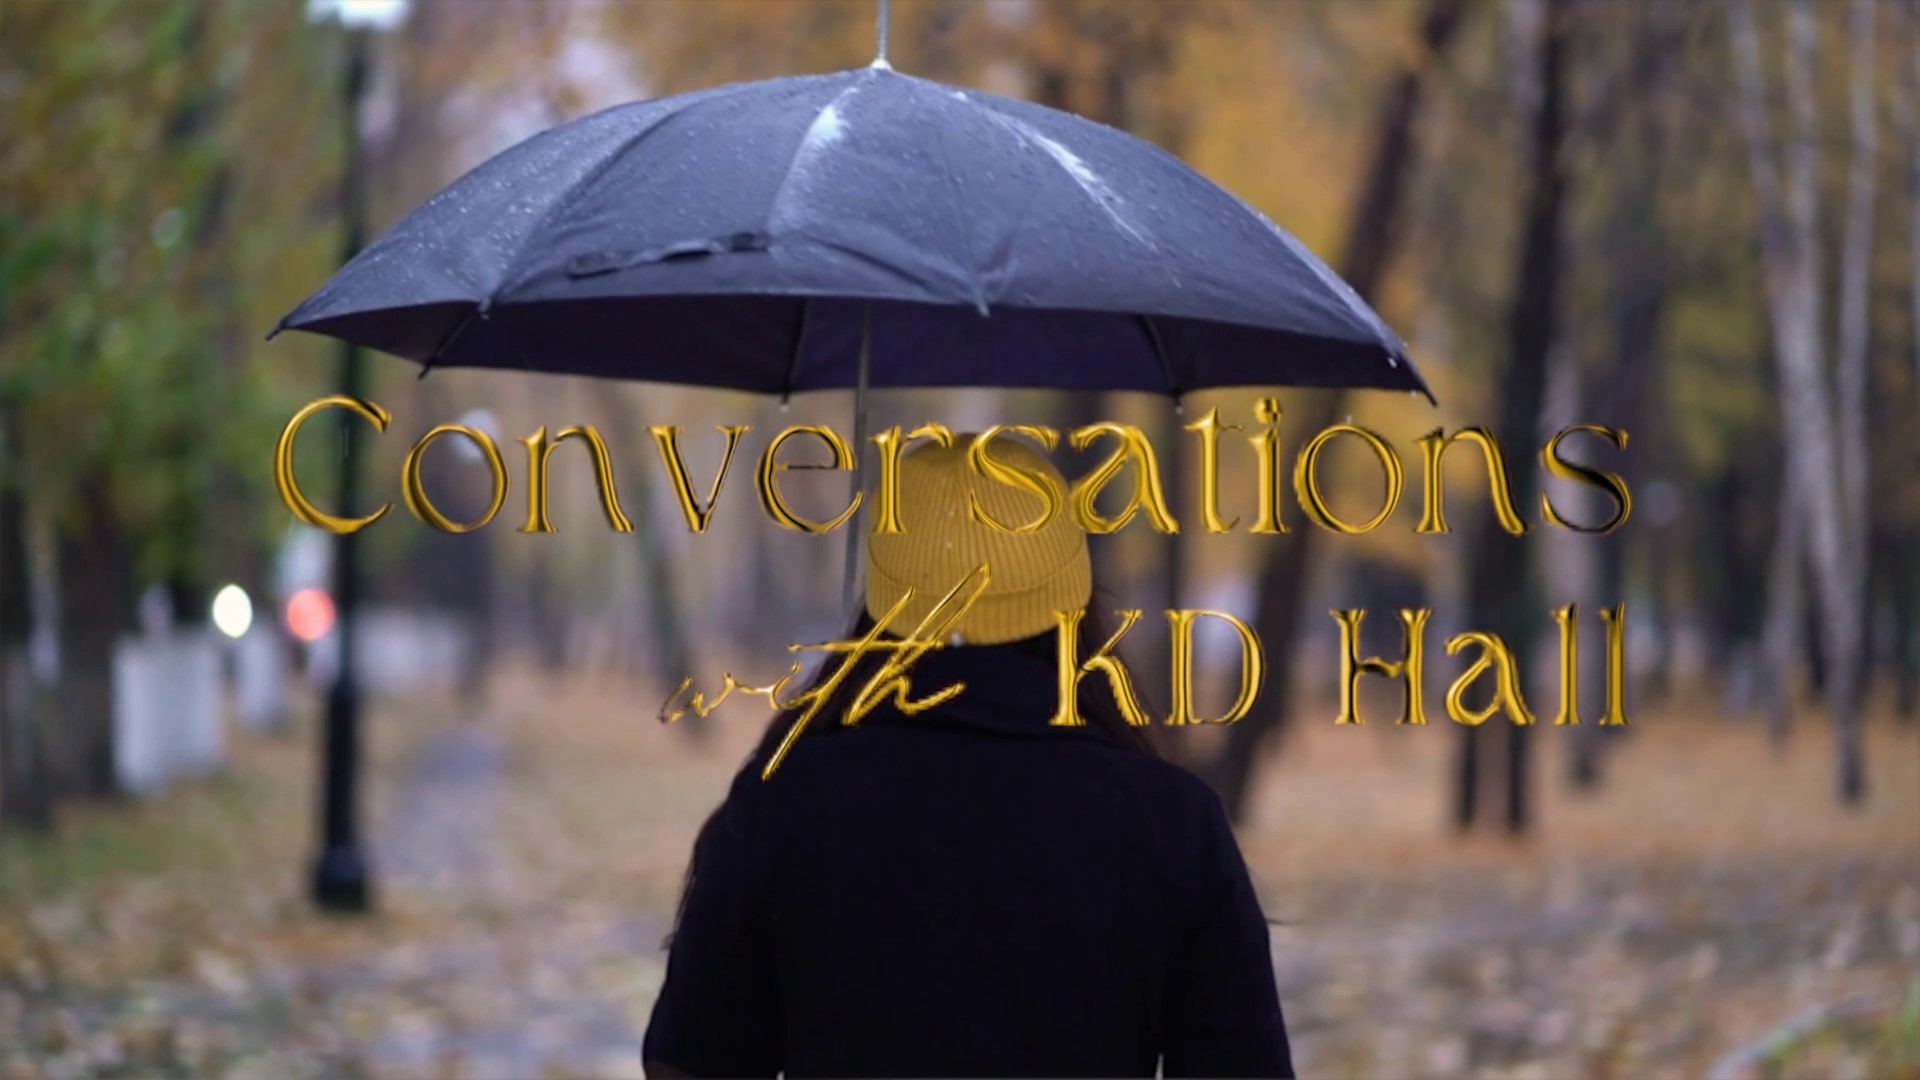 KD Hall hosts this one-of-a-kind talk show that brings together community figures to offer fresh perspectives and challenge conventional thinking.